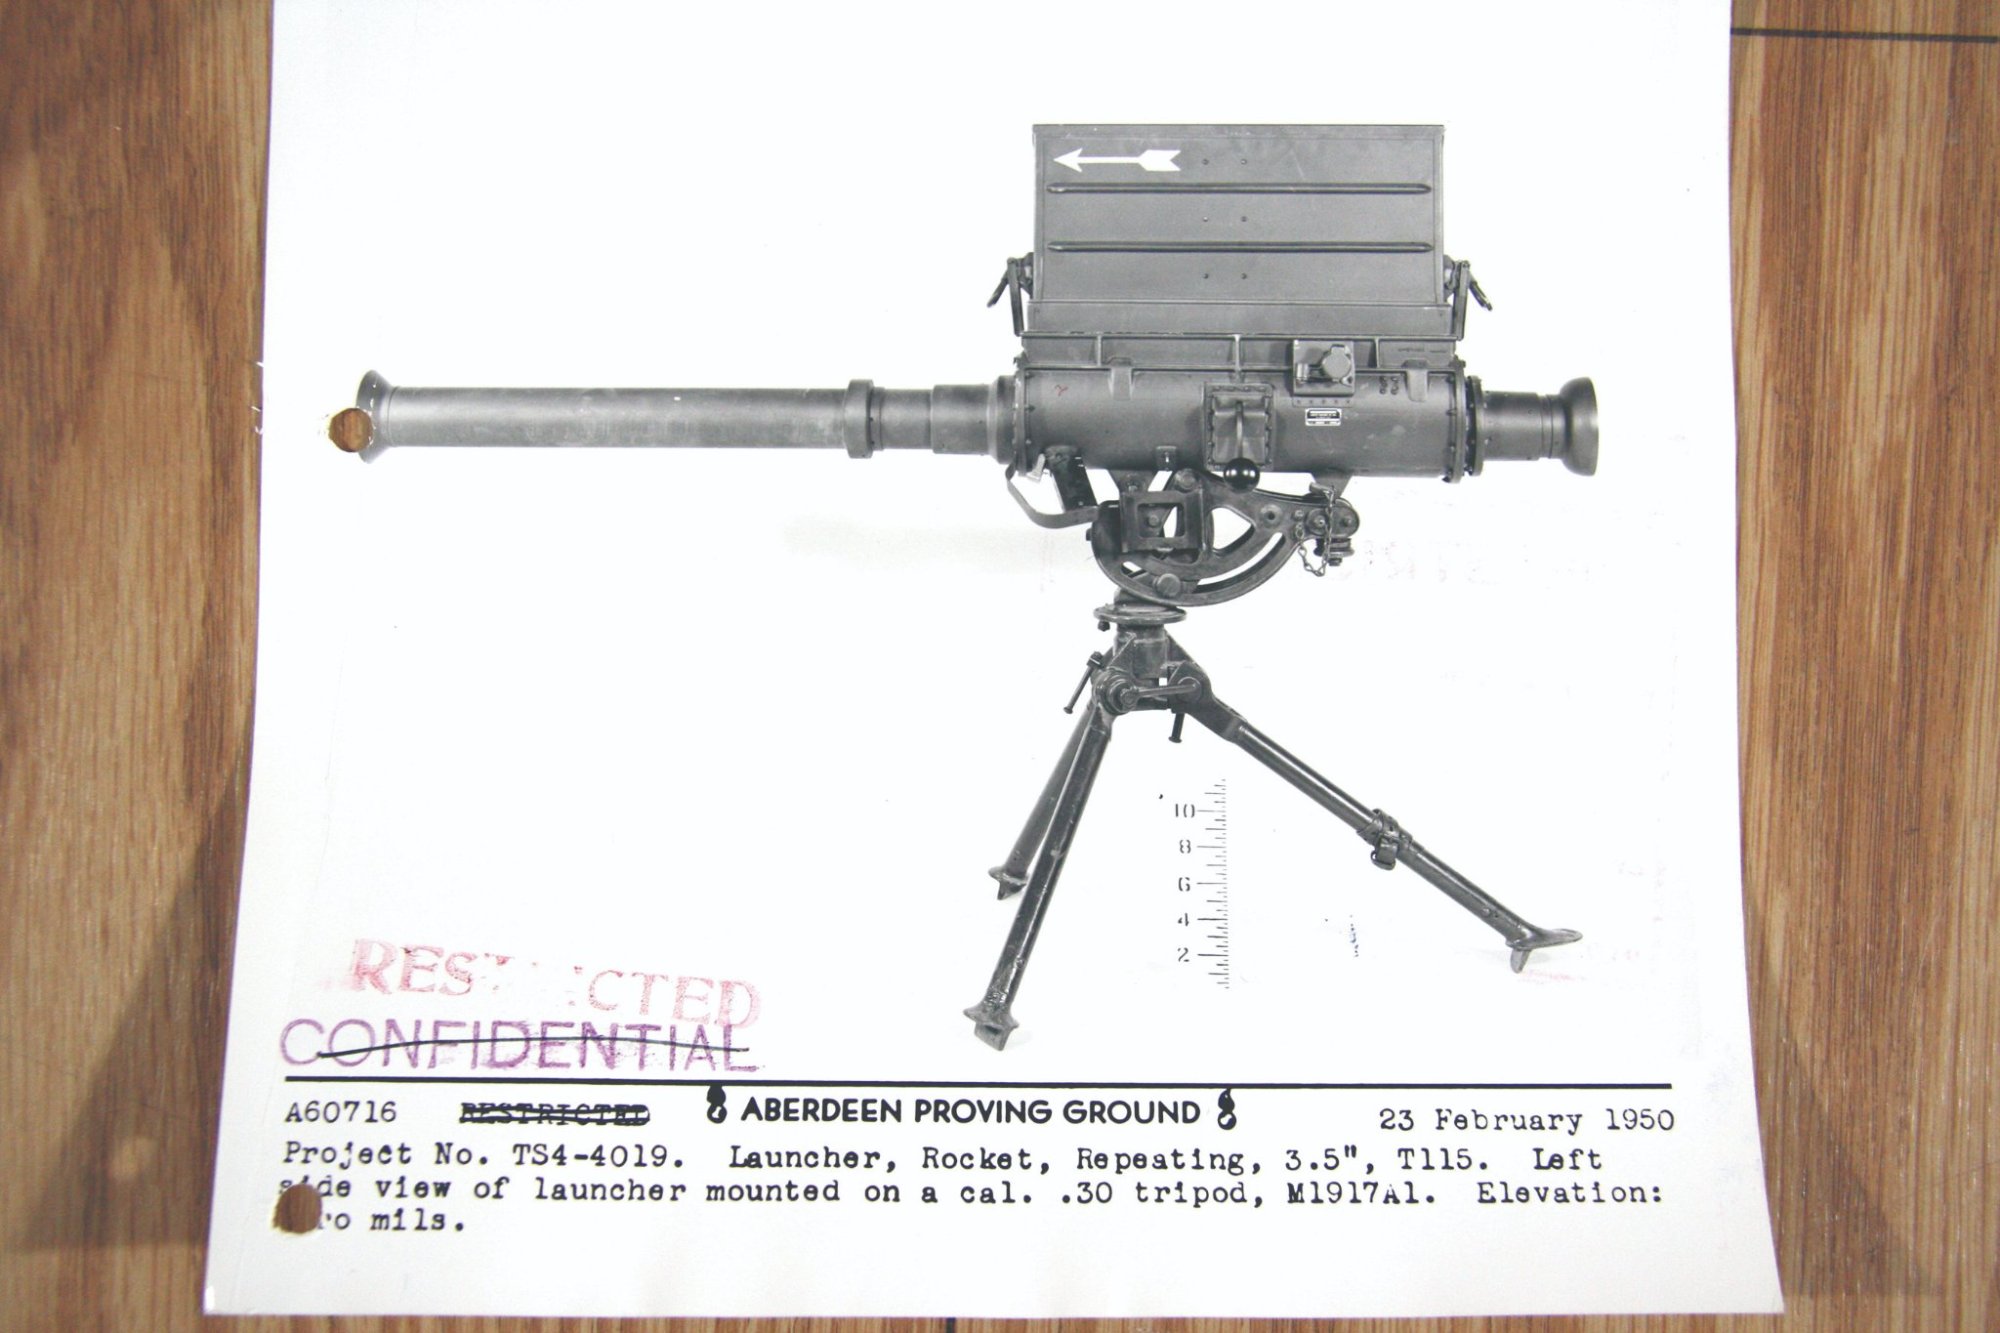 The US Army M25 Rocket Launcher